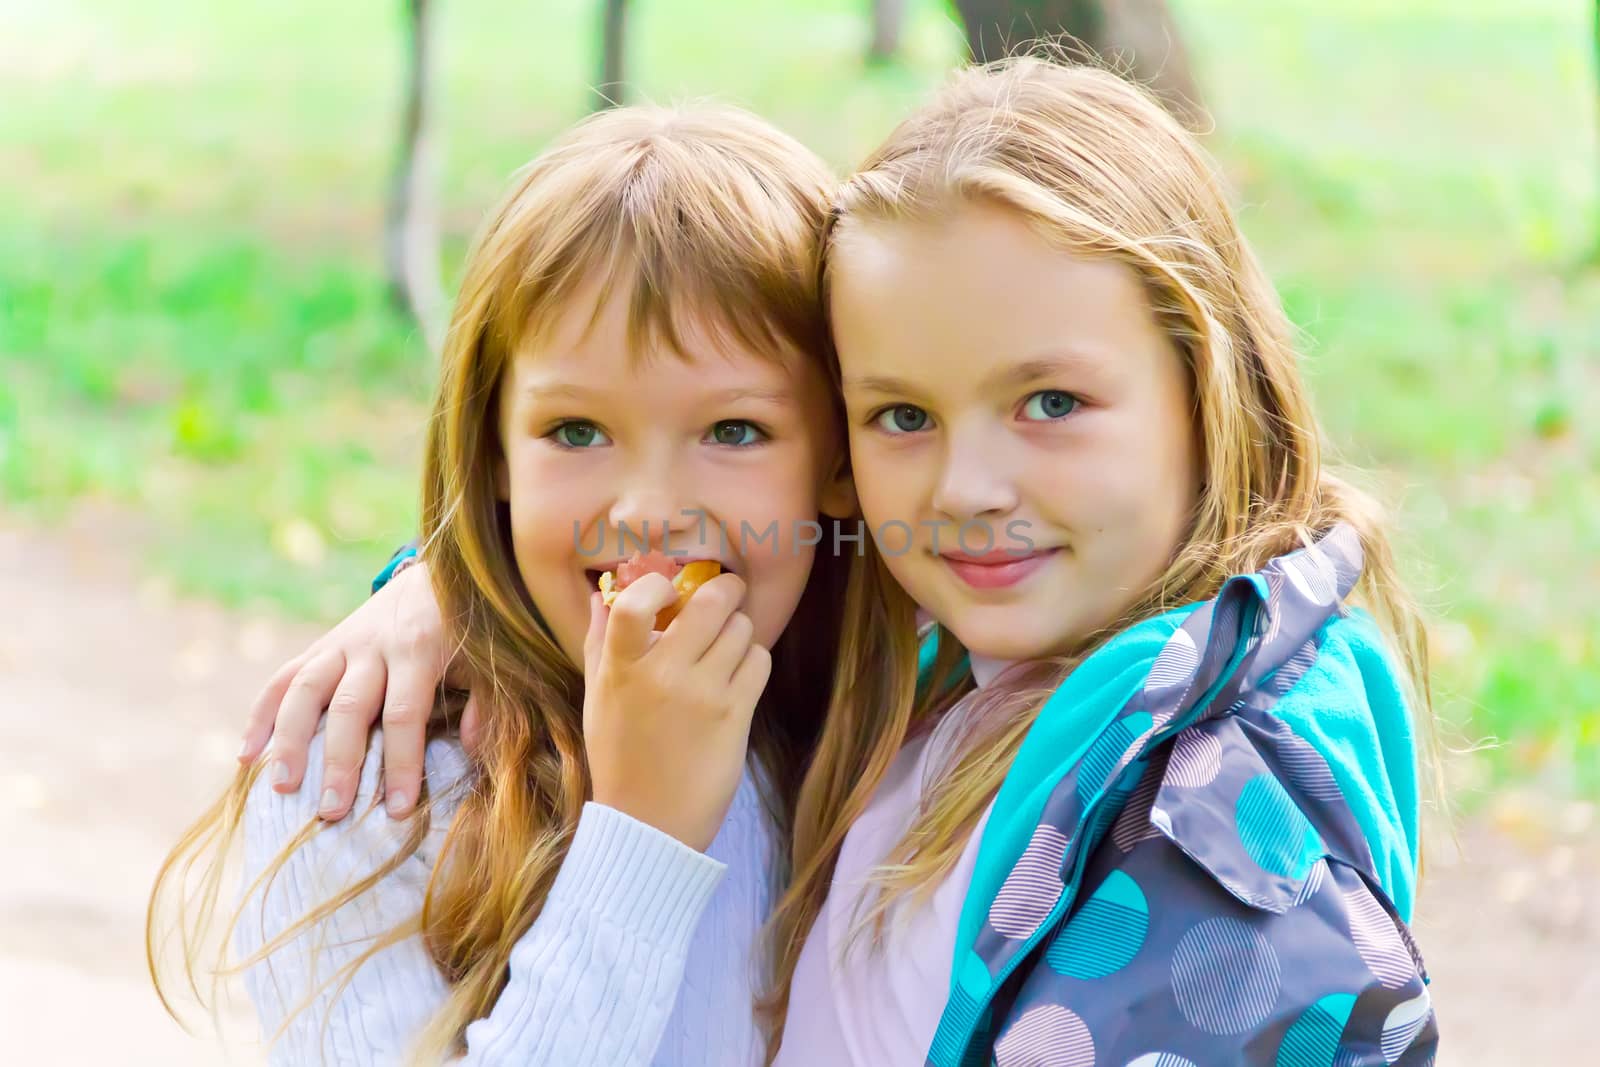 Photo of two eating girls in summer